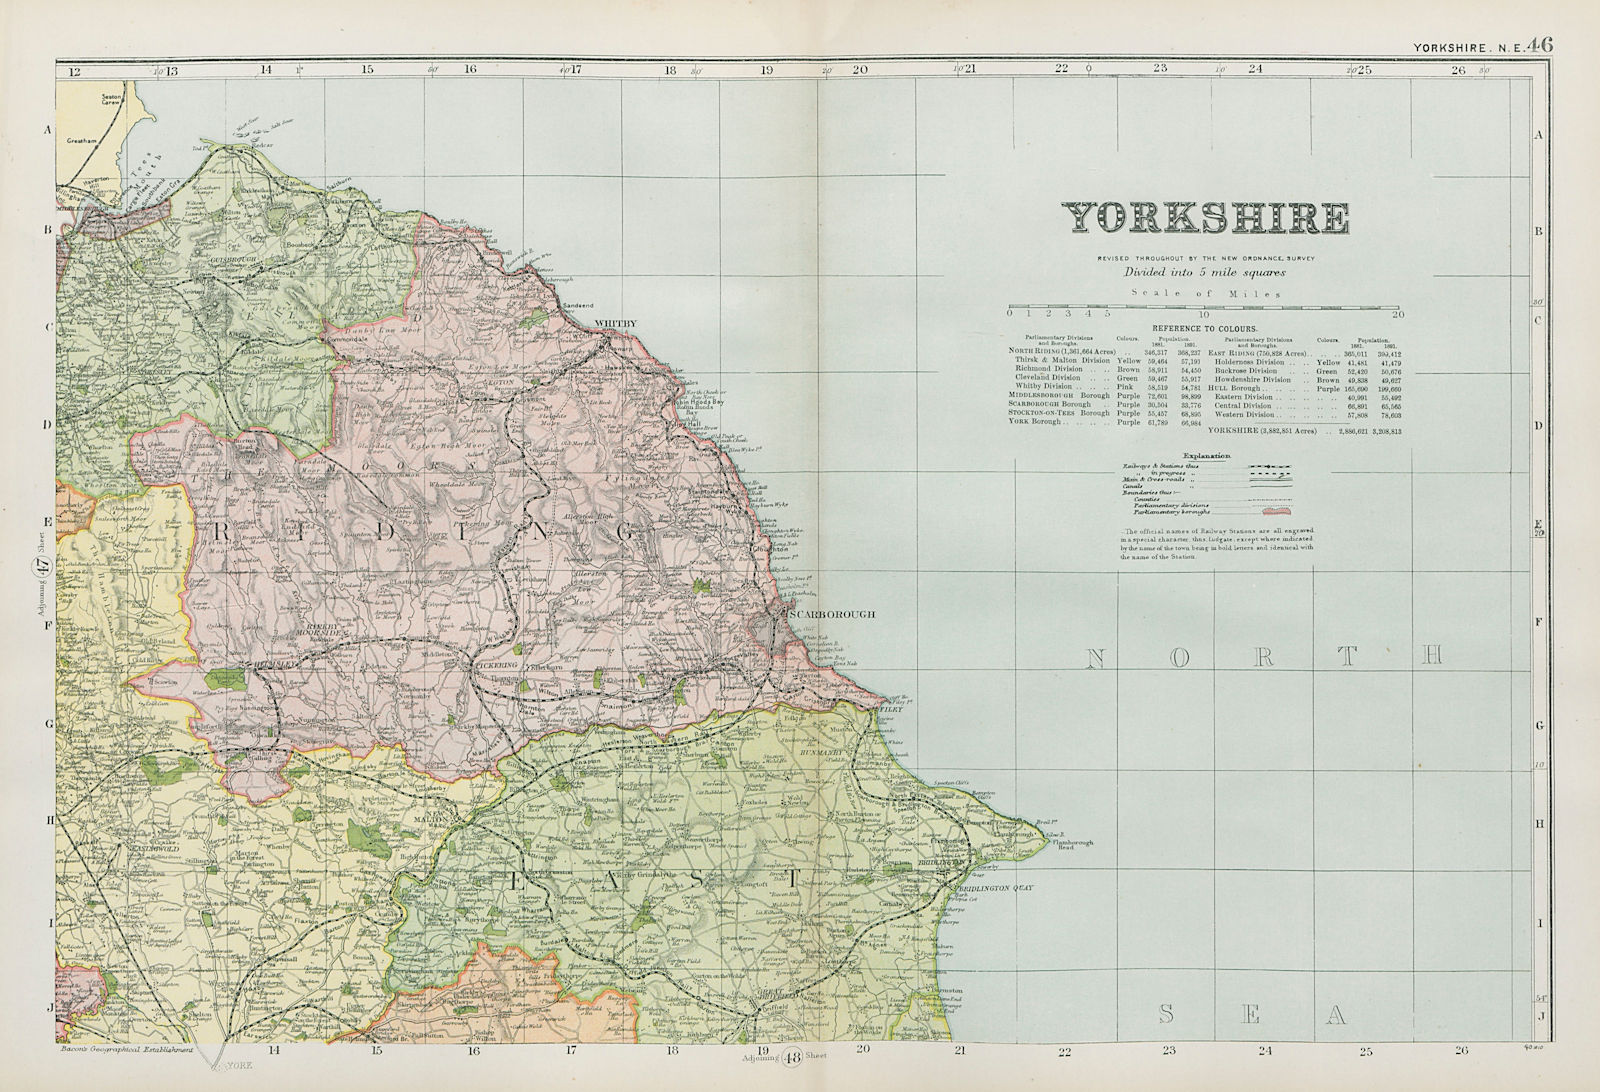 NORTH YORK MOORS. Yorkshire North East. Parliamentary divisions. BACON 1900 map